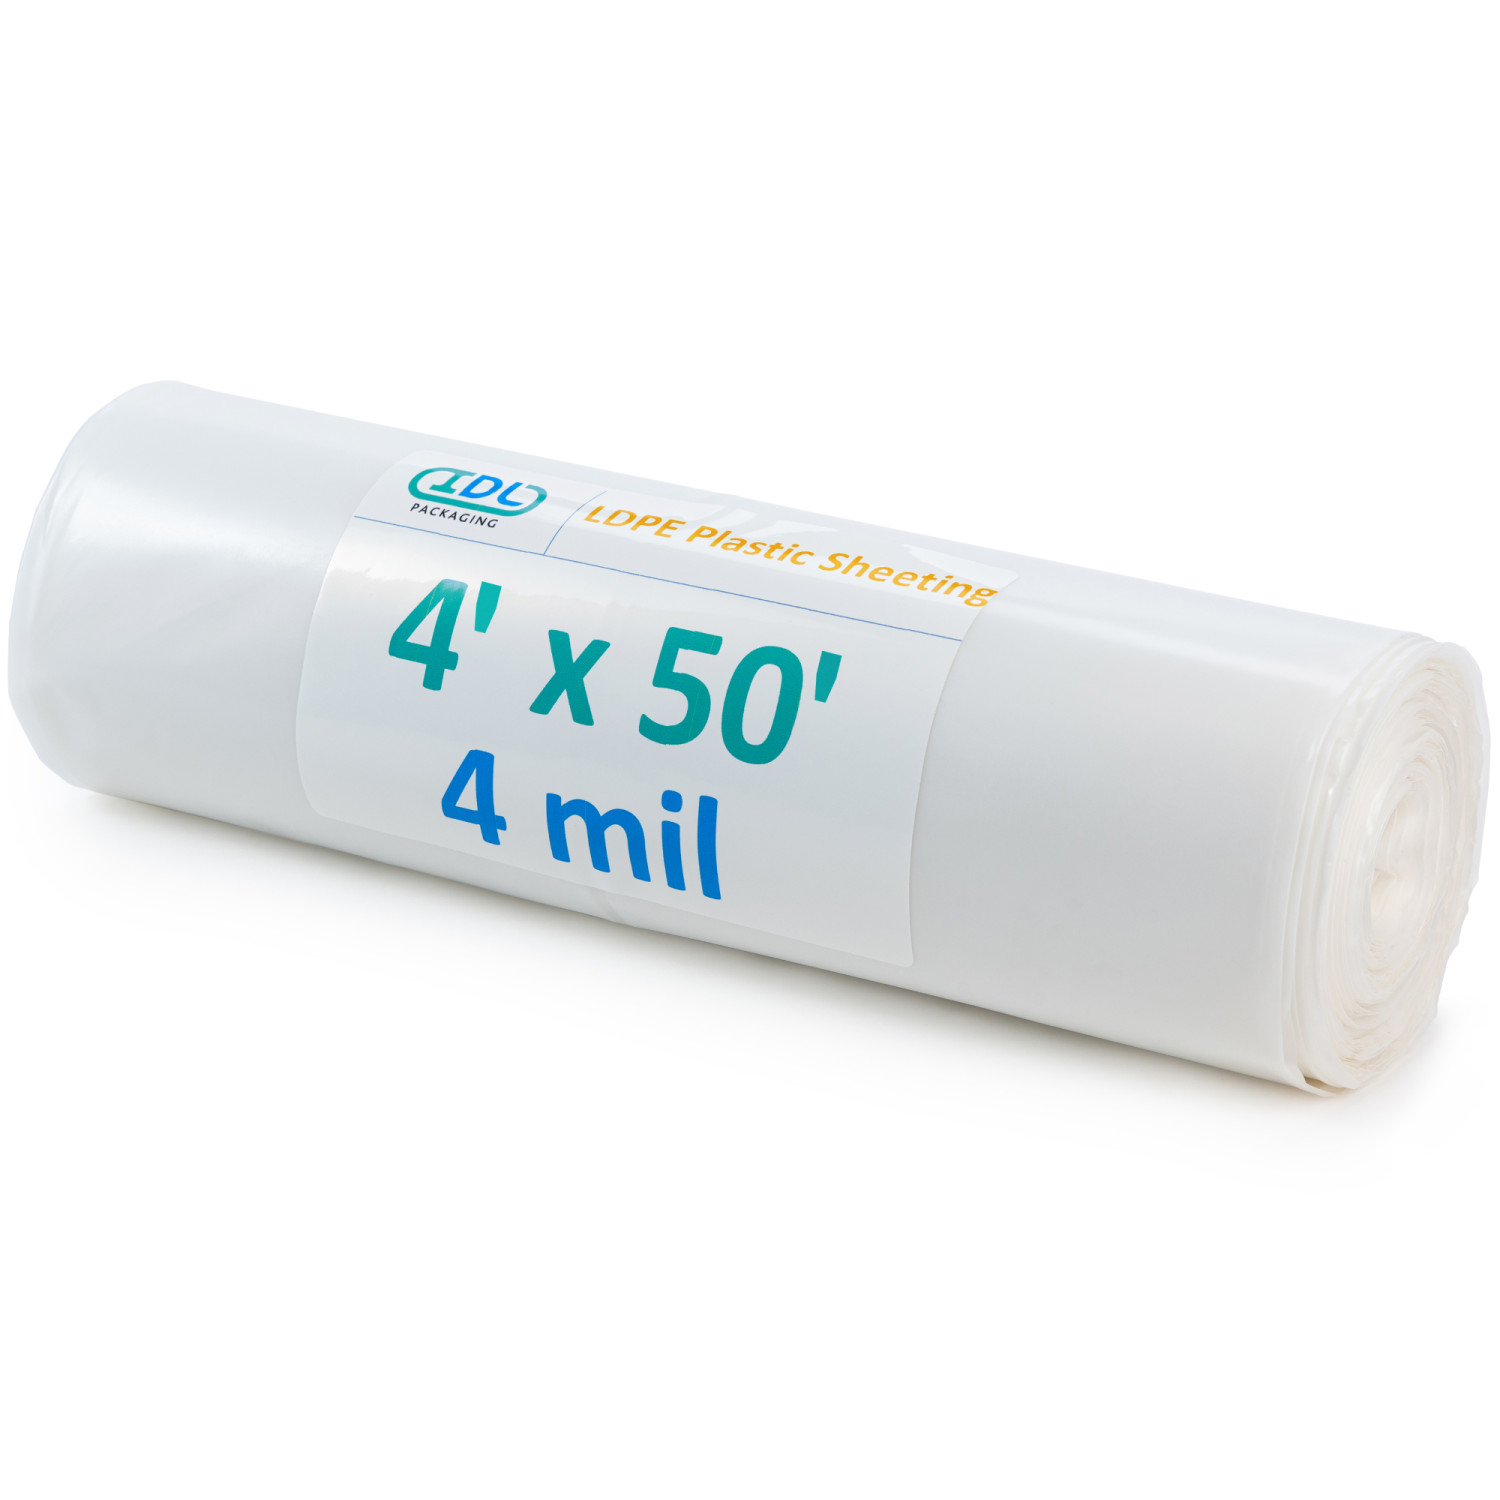 Ultra Thick Commercial Heavy Duty Foil Roll 18 inch x 500 Sq Foot